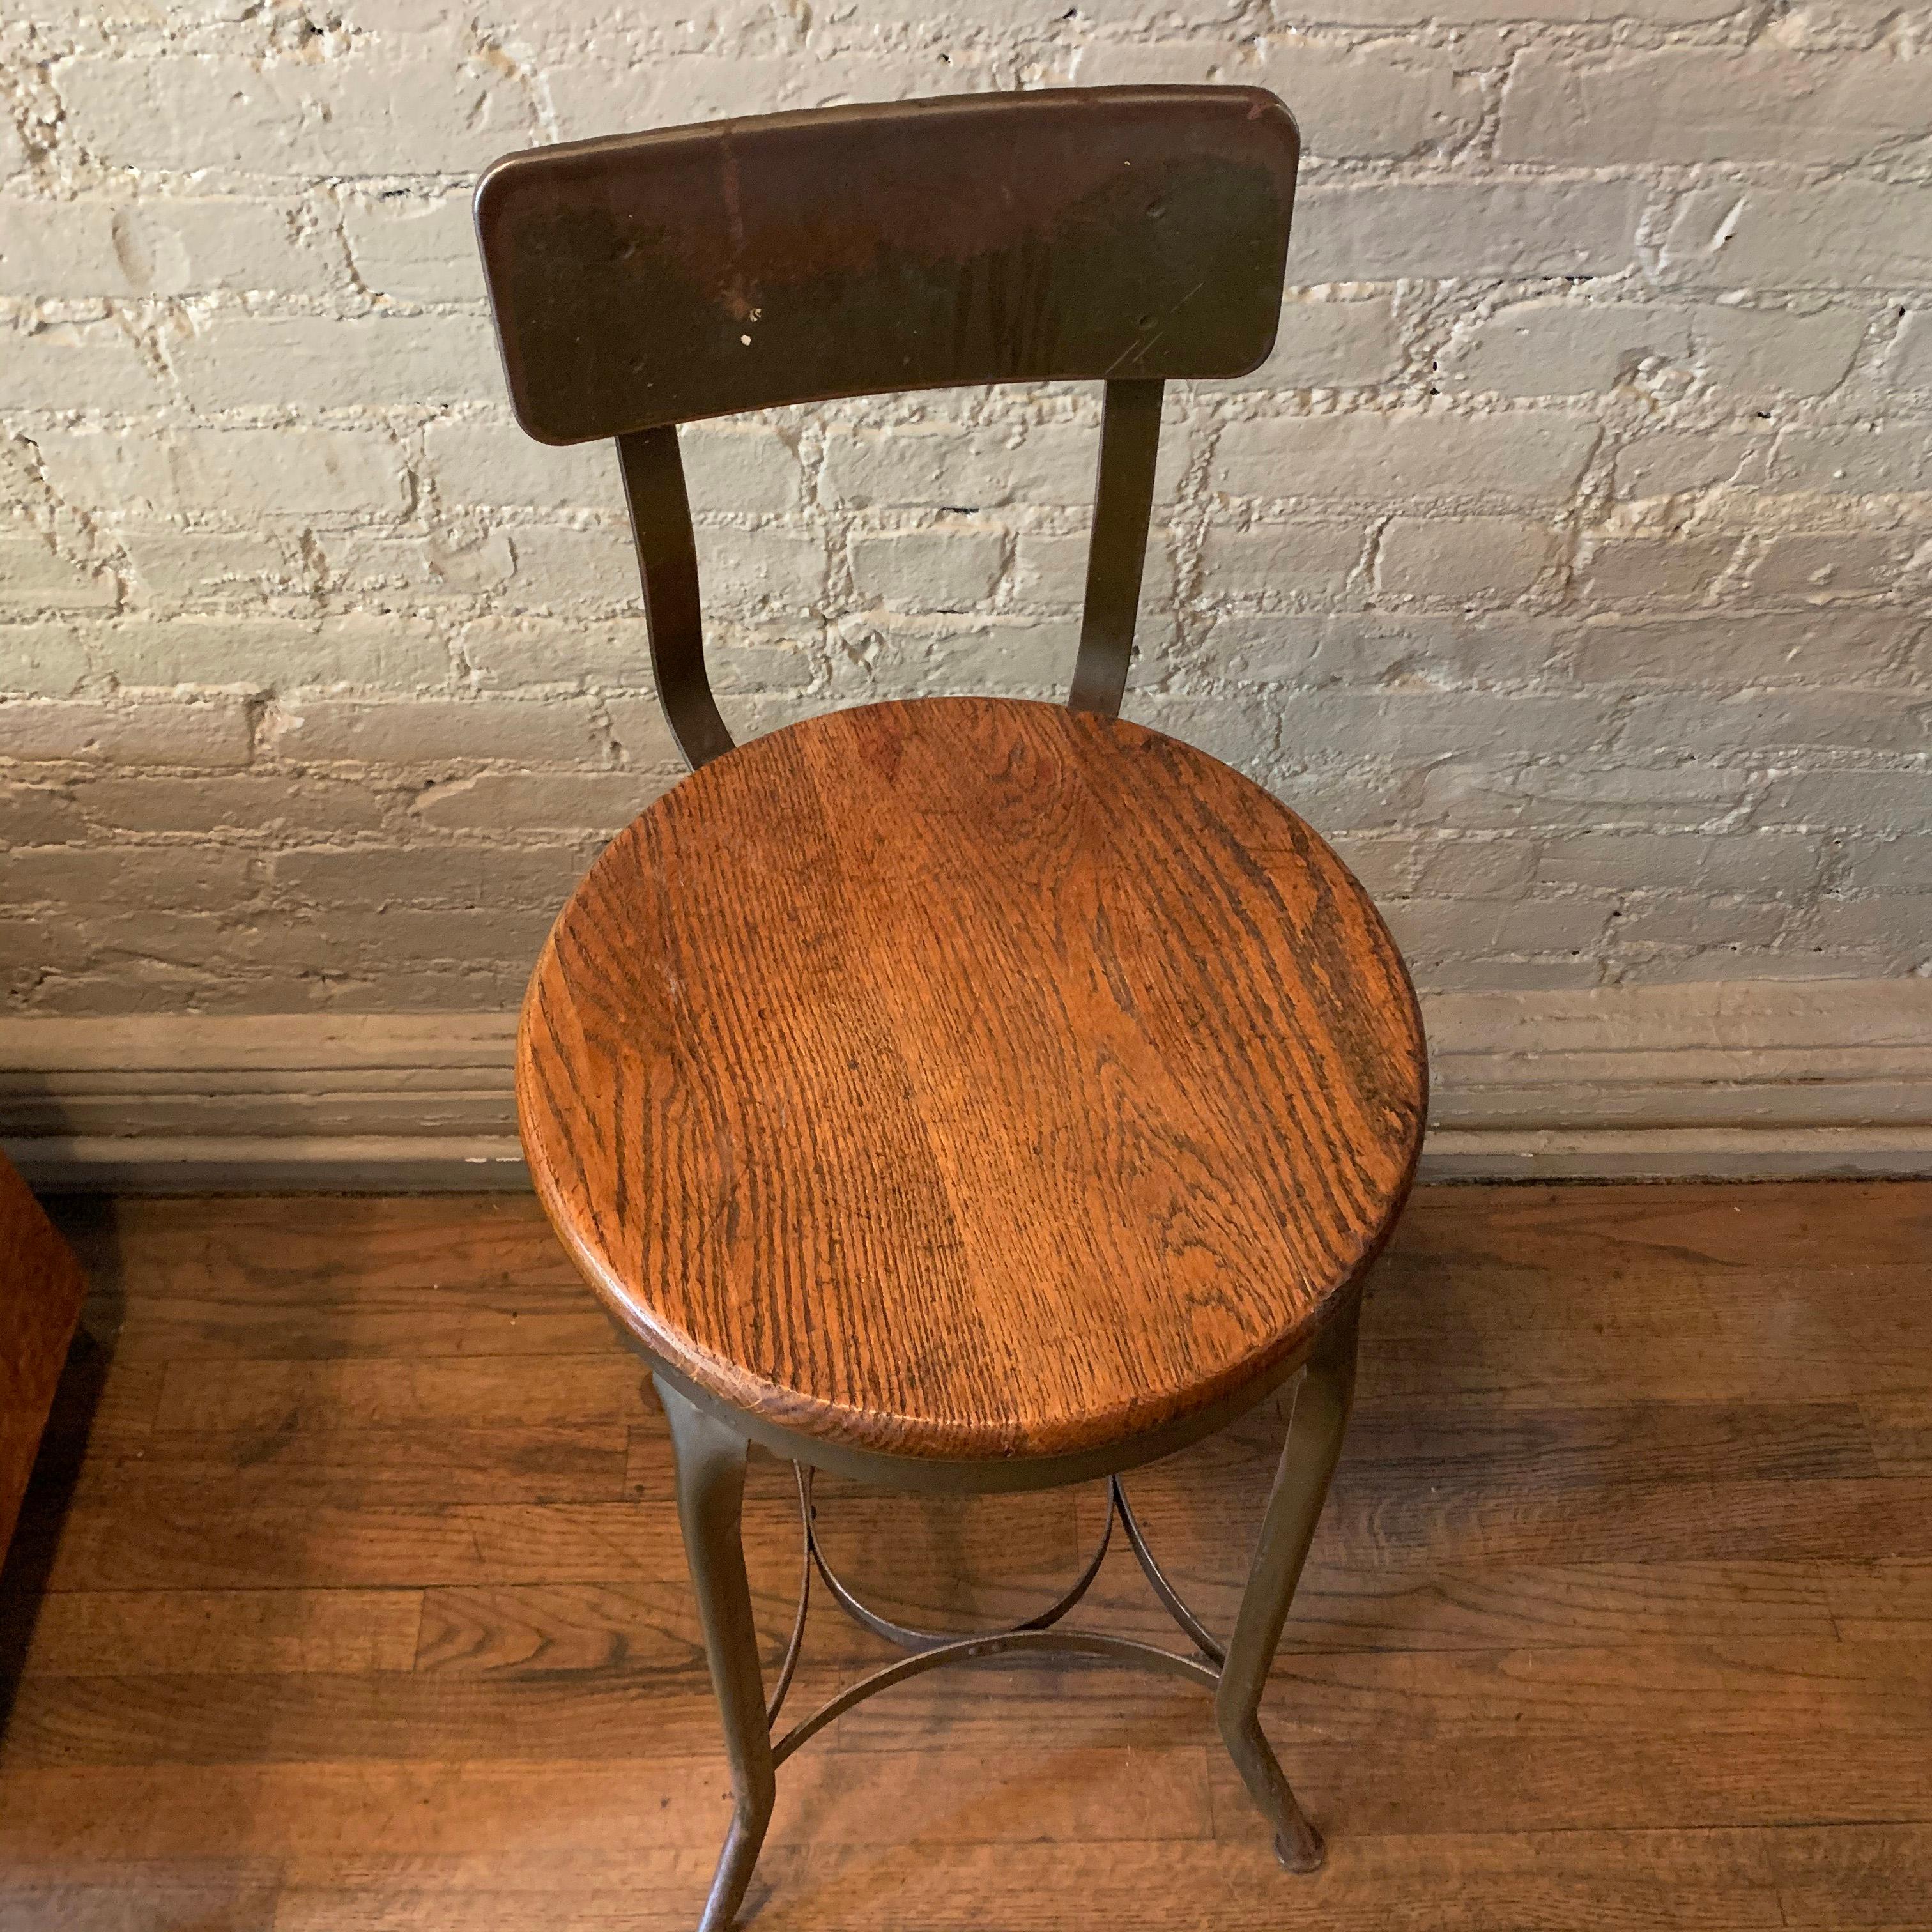 20th Century Tall Industrial Shop Stool by Toledo Metal Furniture Co. For Sale